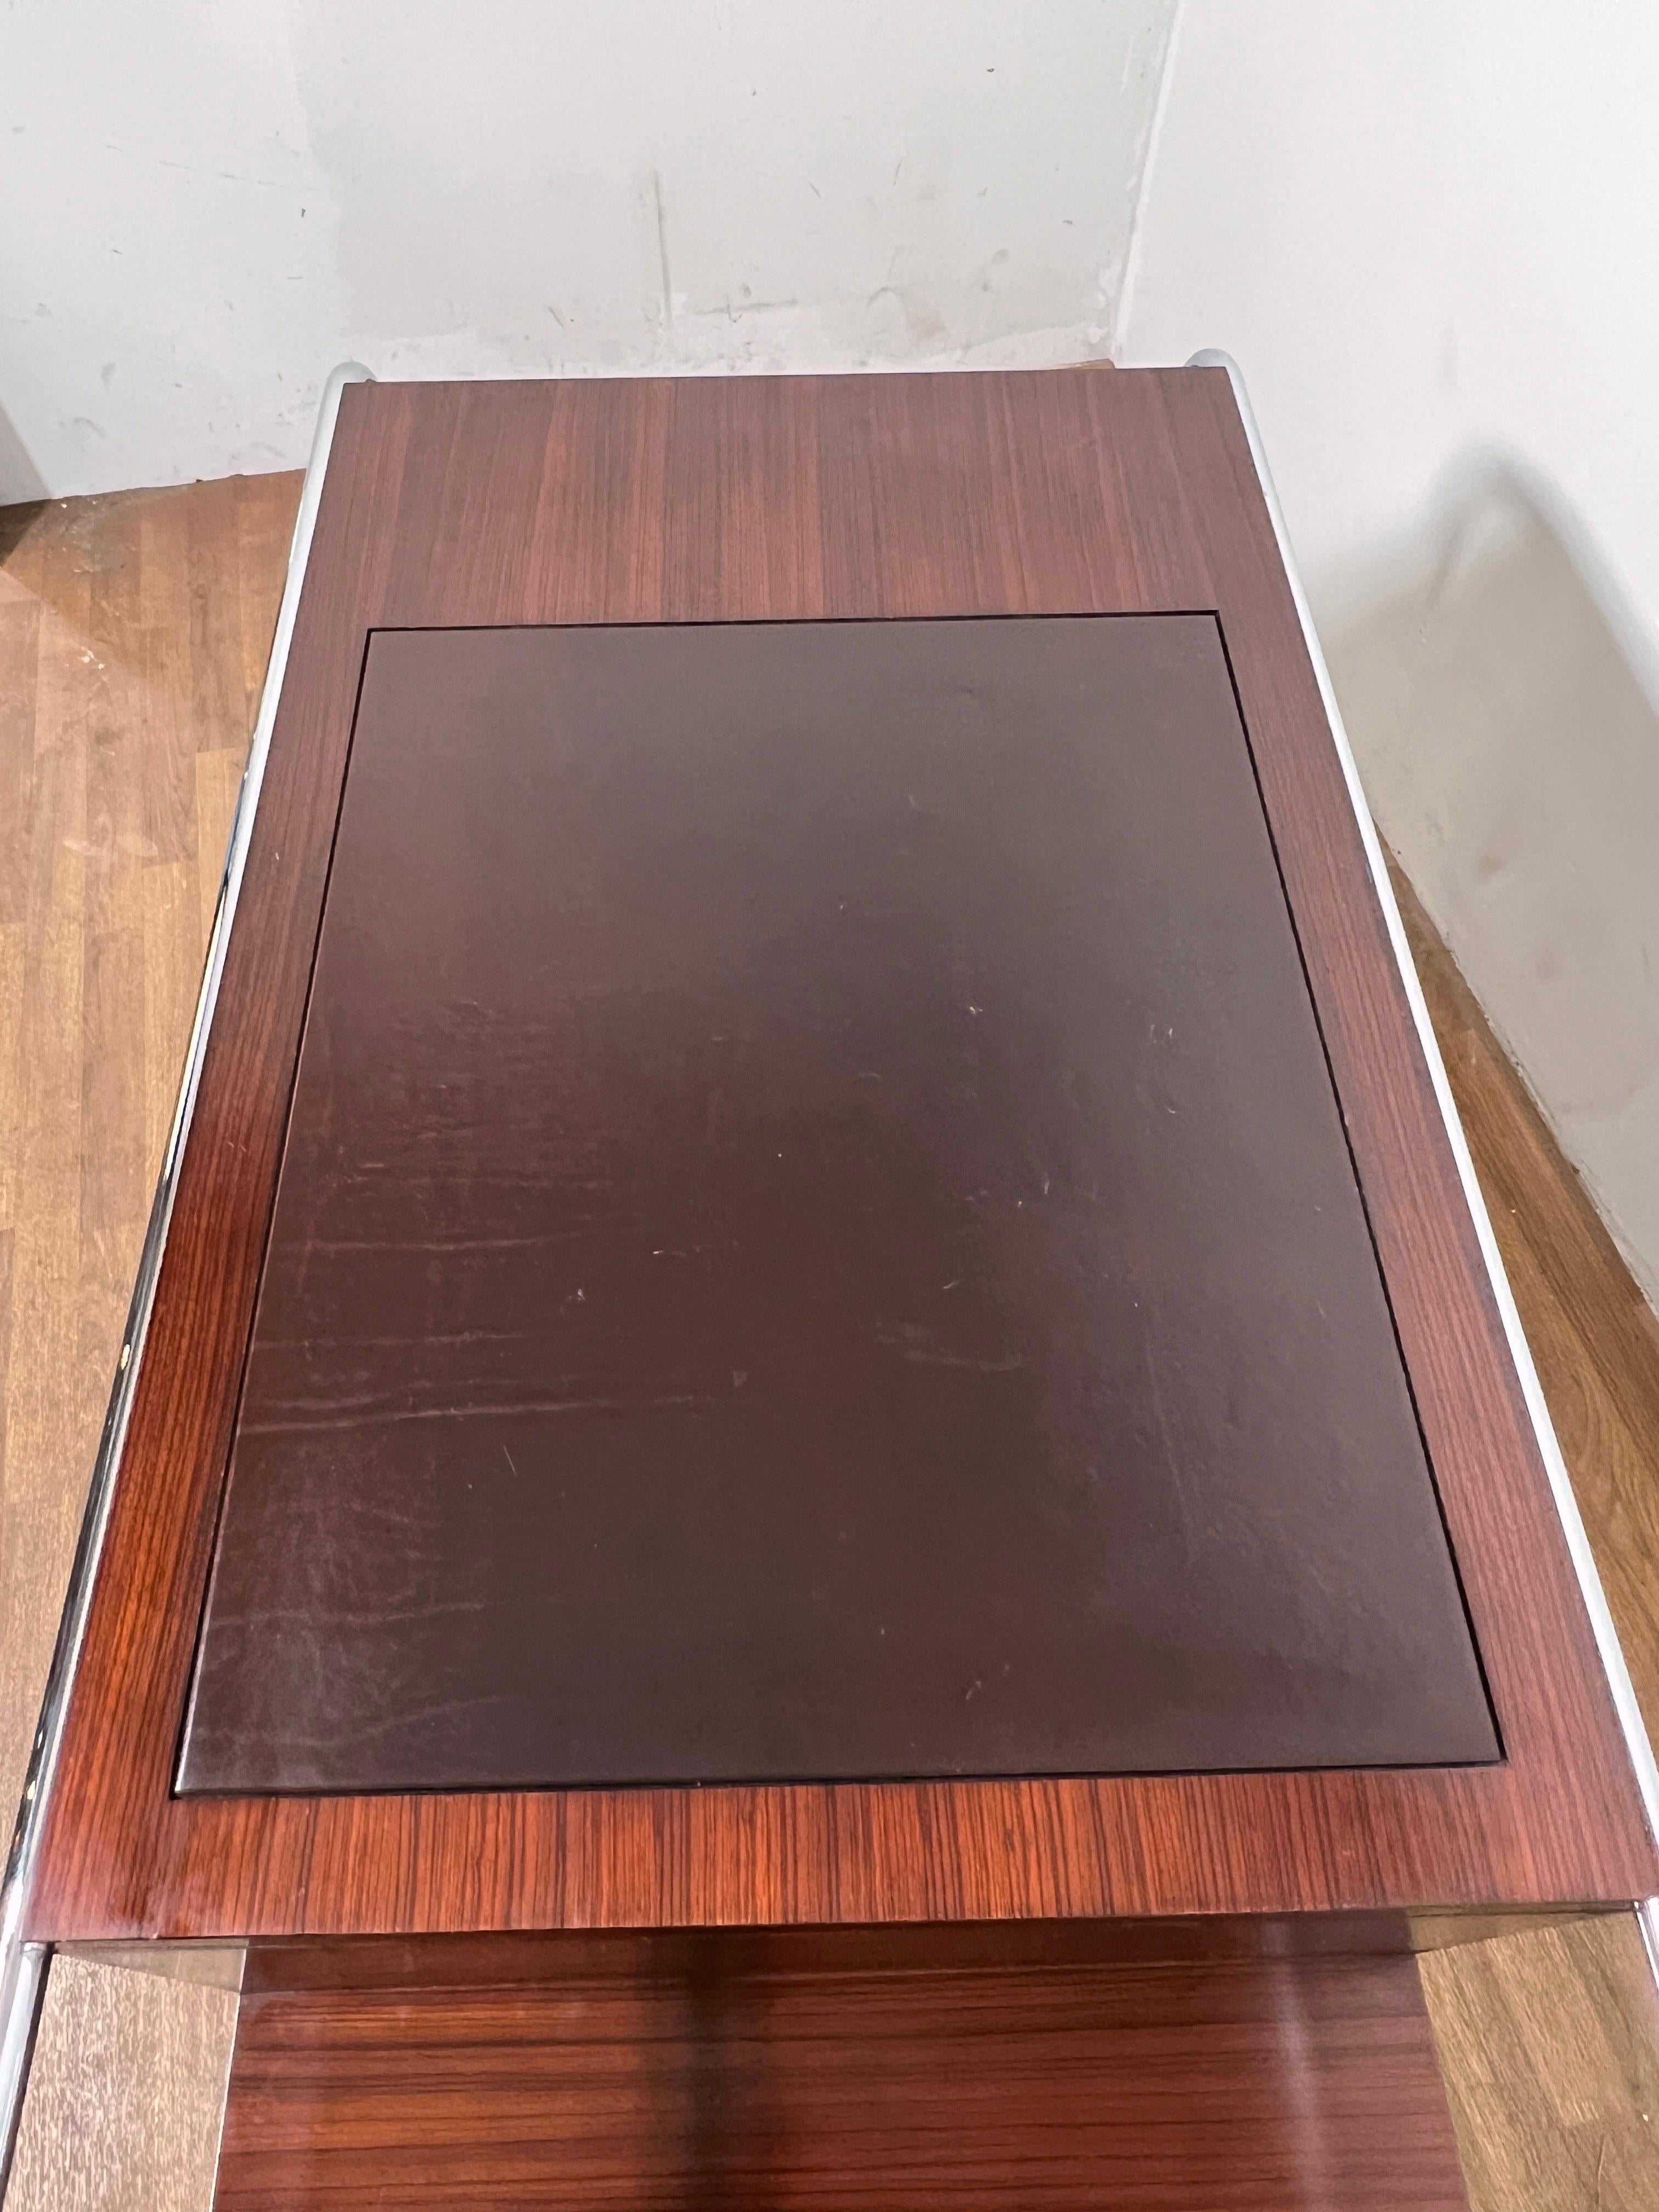 Ralph Lauren Bauhaus Inspired Desk in Rosewood, Chrome and Leather For Sale 2